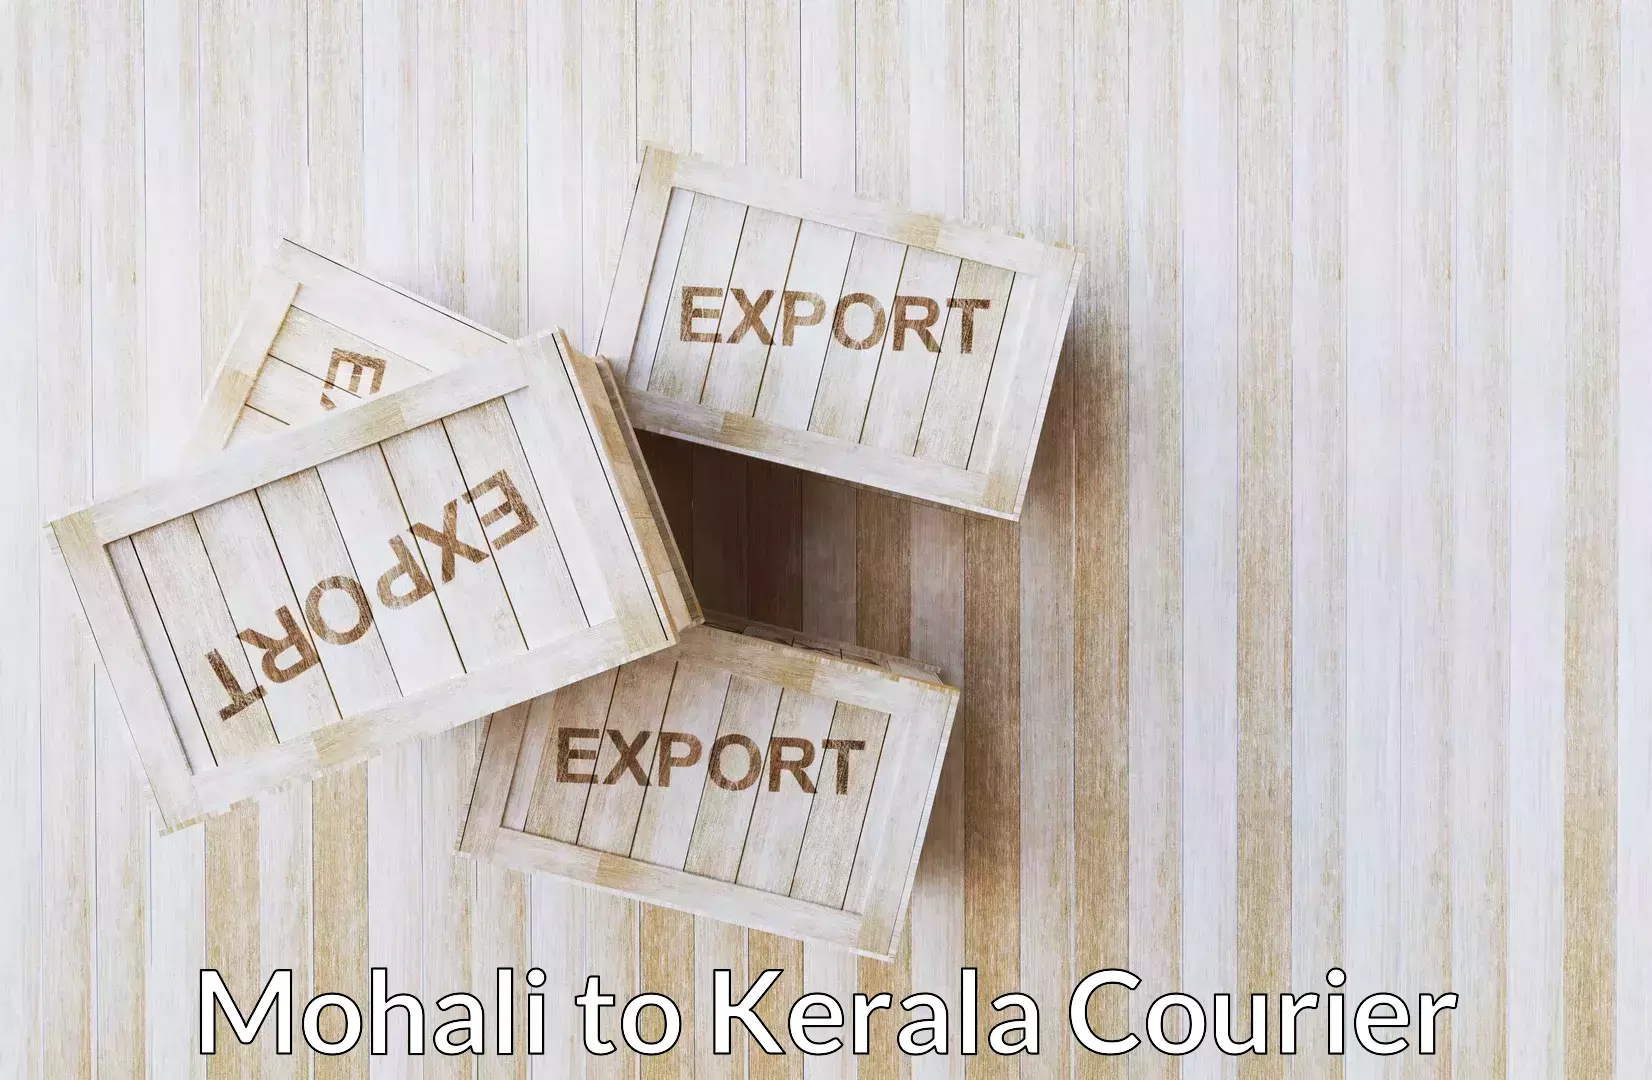 Luggage delivery app Mohali to Kerala